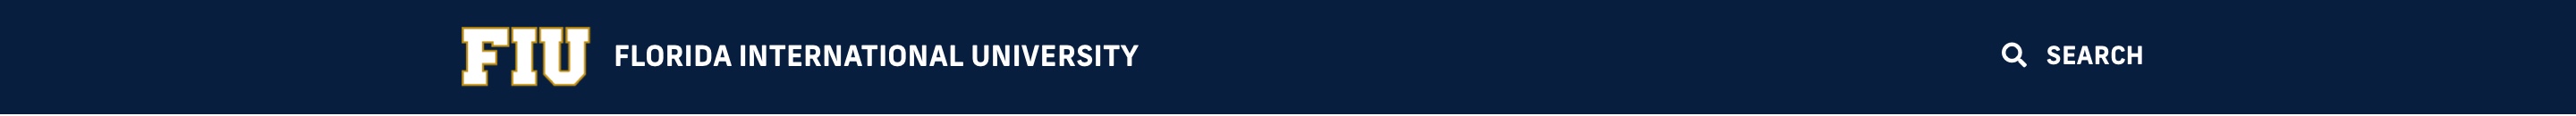 The brand bar in a blue background color, which contains the FIU logo, FIU written out and the search functionality.